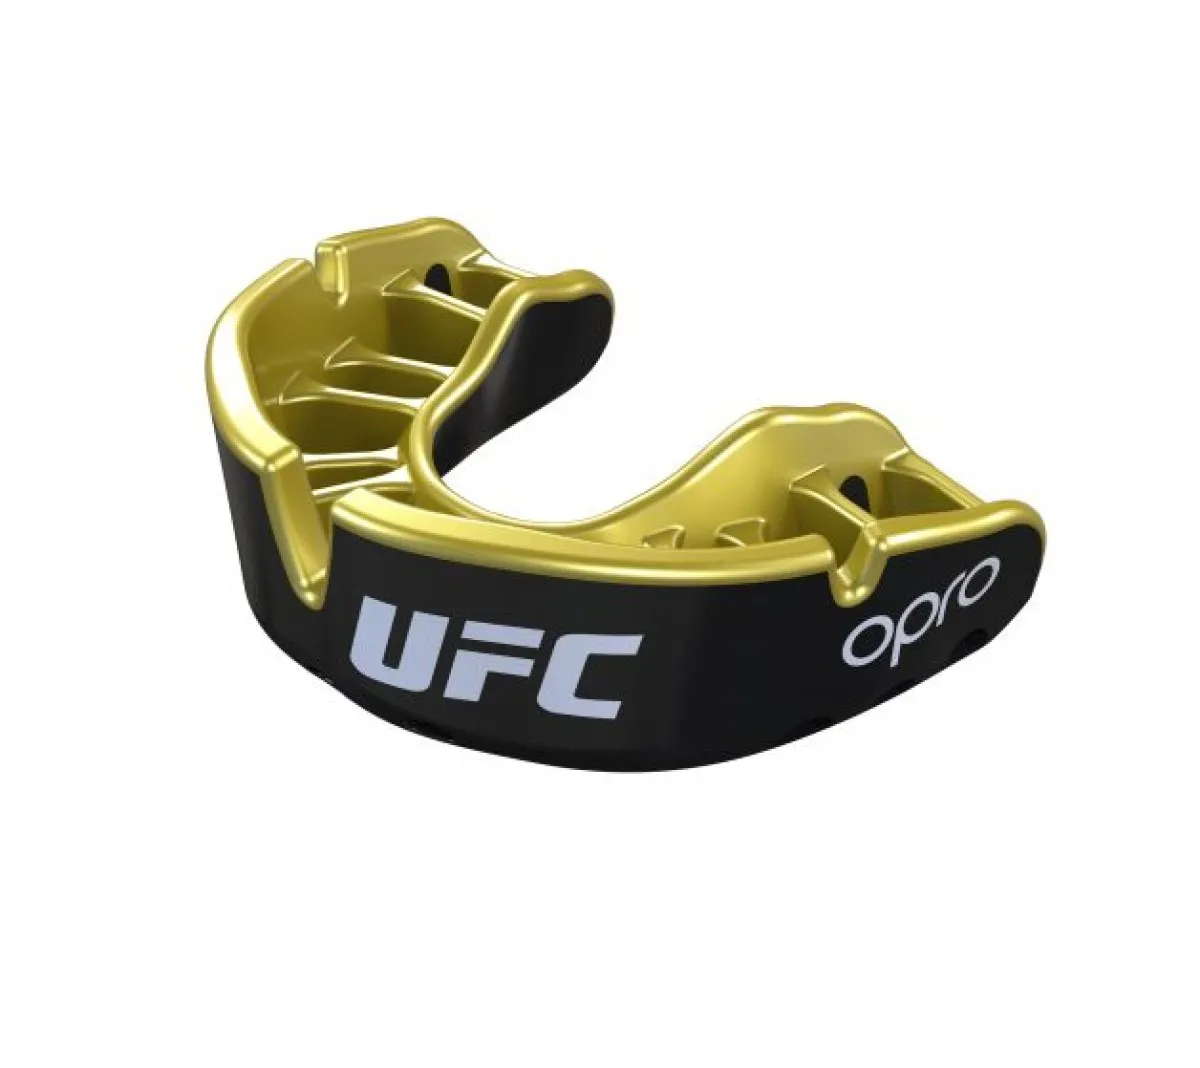 OPRO mouthguard UFC Silver - red/black, SeniorOPRO mouthguard UFC Gold - red/silver, SeniorOPRO mouthguard UFC Gold - black/gold, Senior